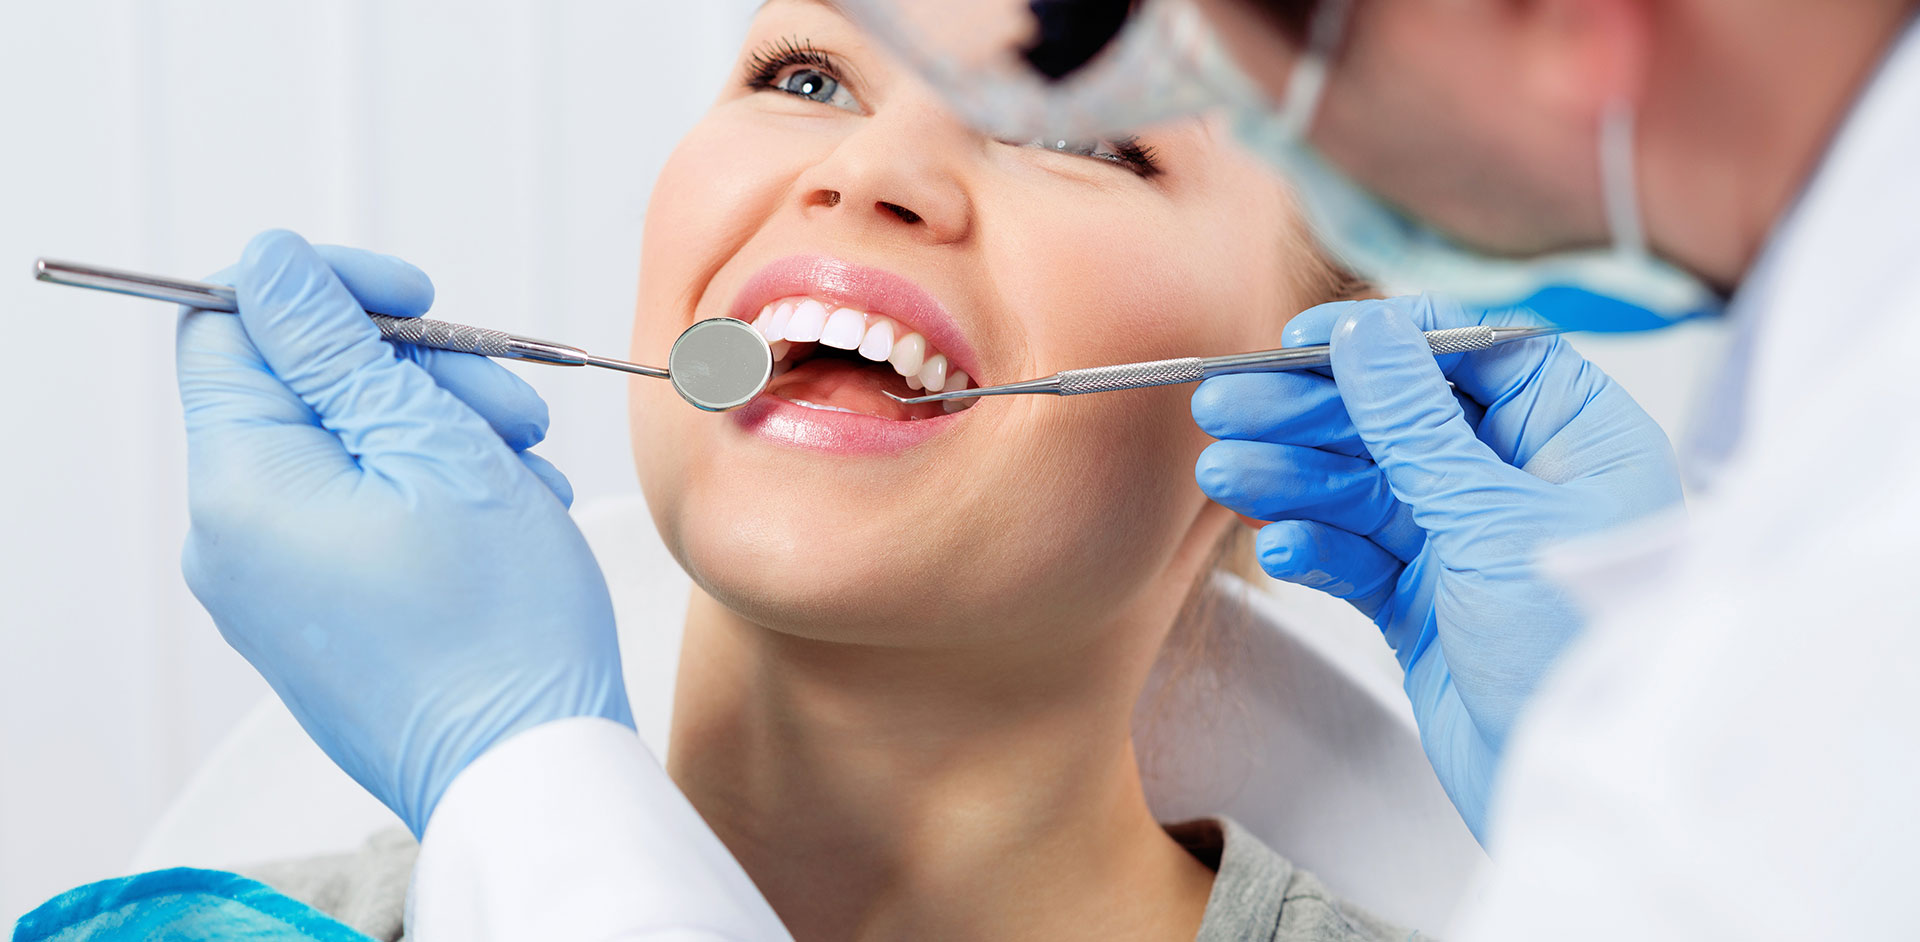 You are currently viewing Dental and Orthodontic Instruments